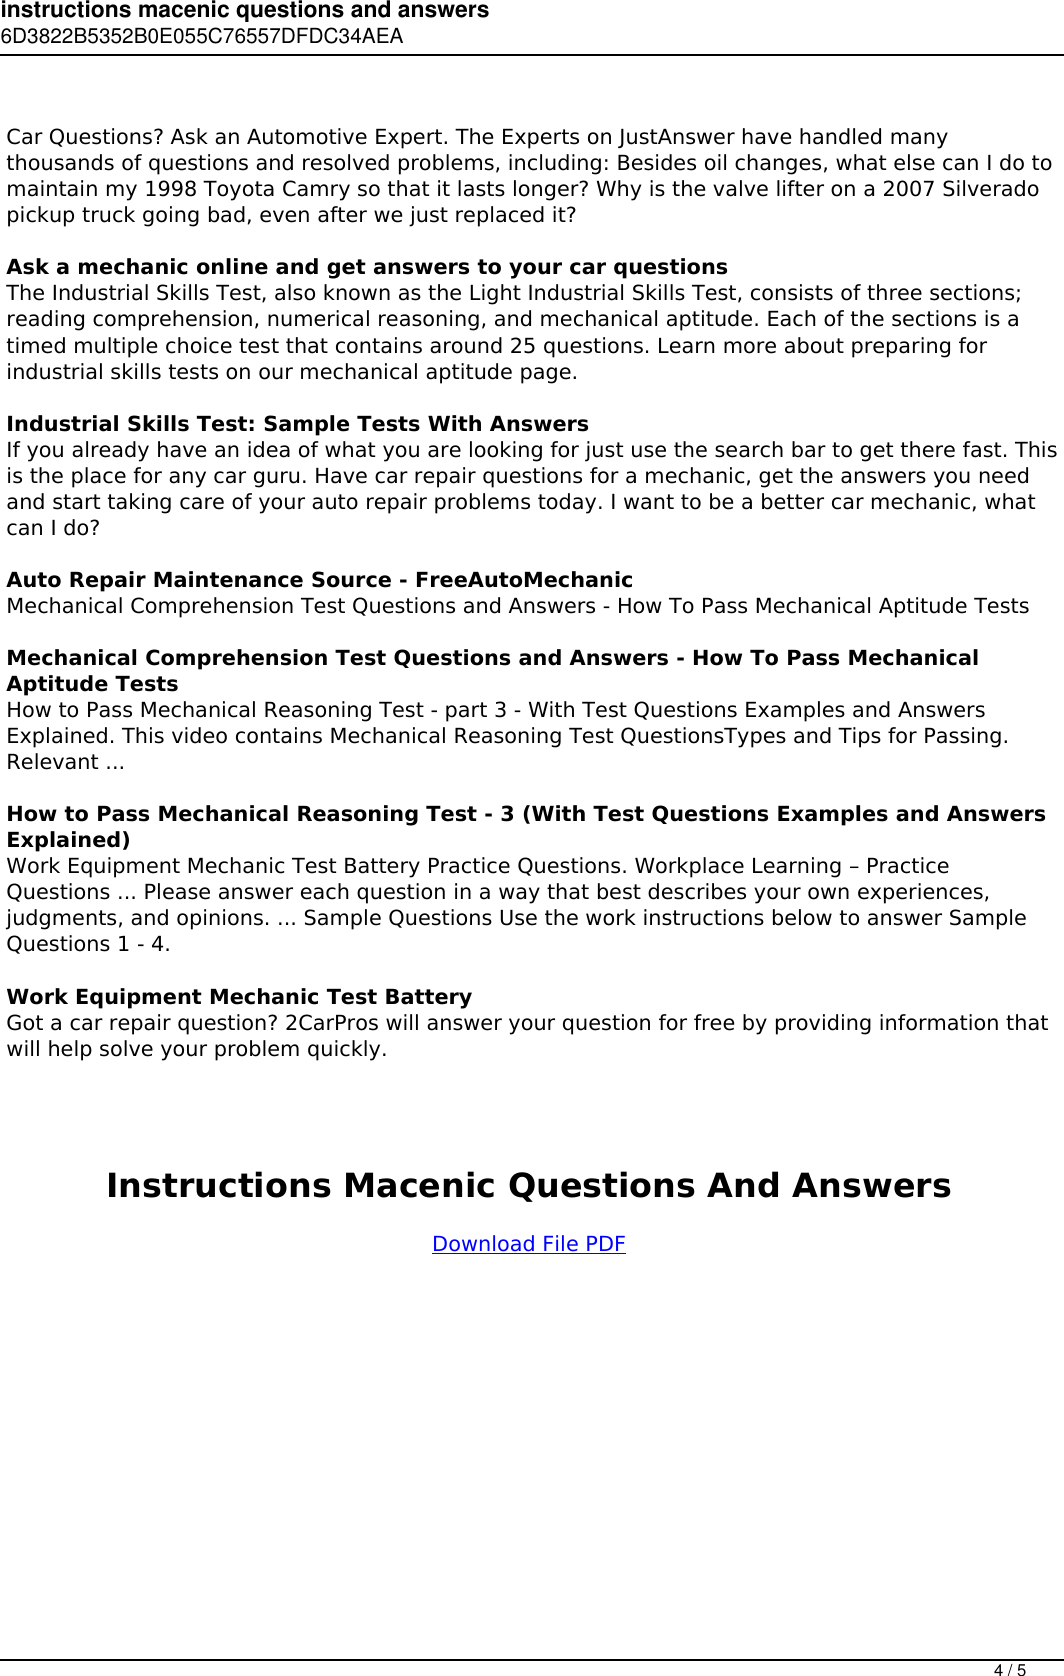 Page 4 of 5 - Instructions Macenic Questions And Answers